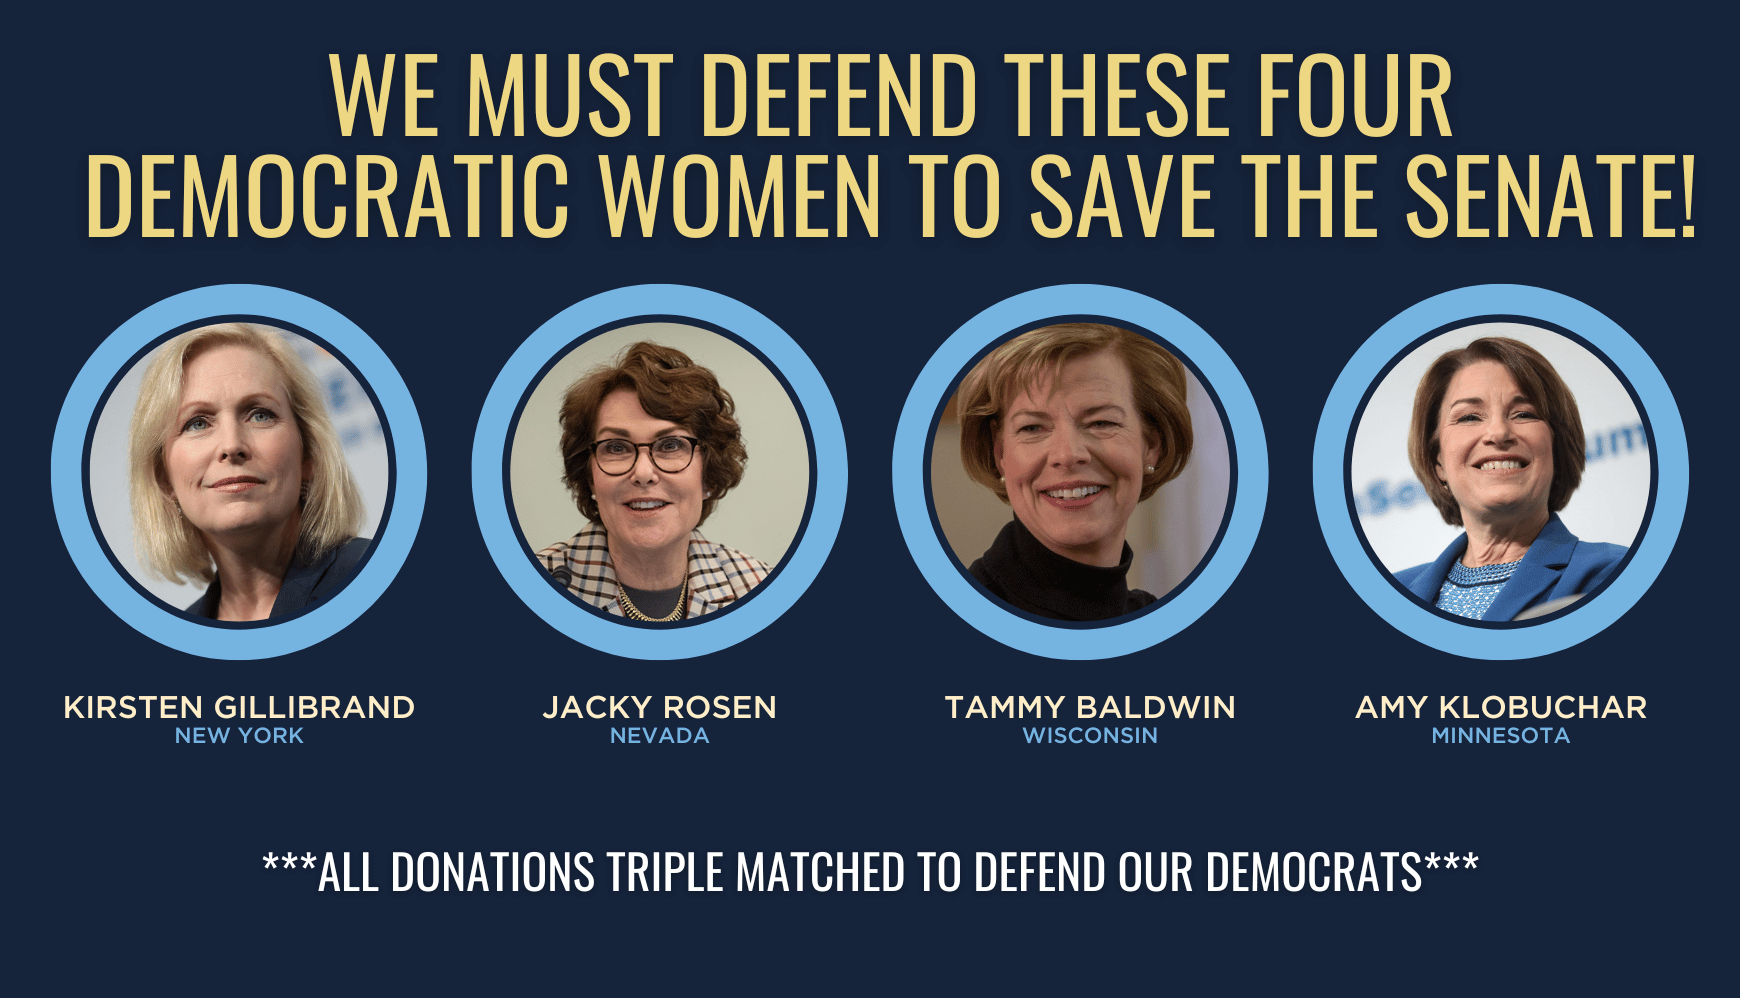 We must defend these four Democratic women in the Senate!